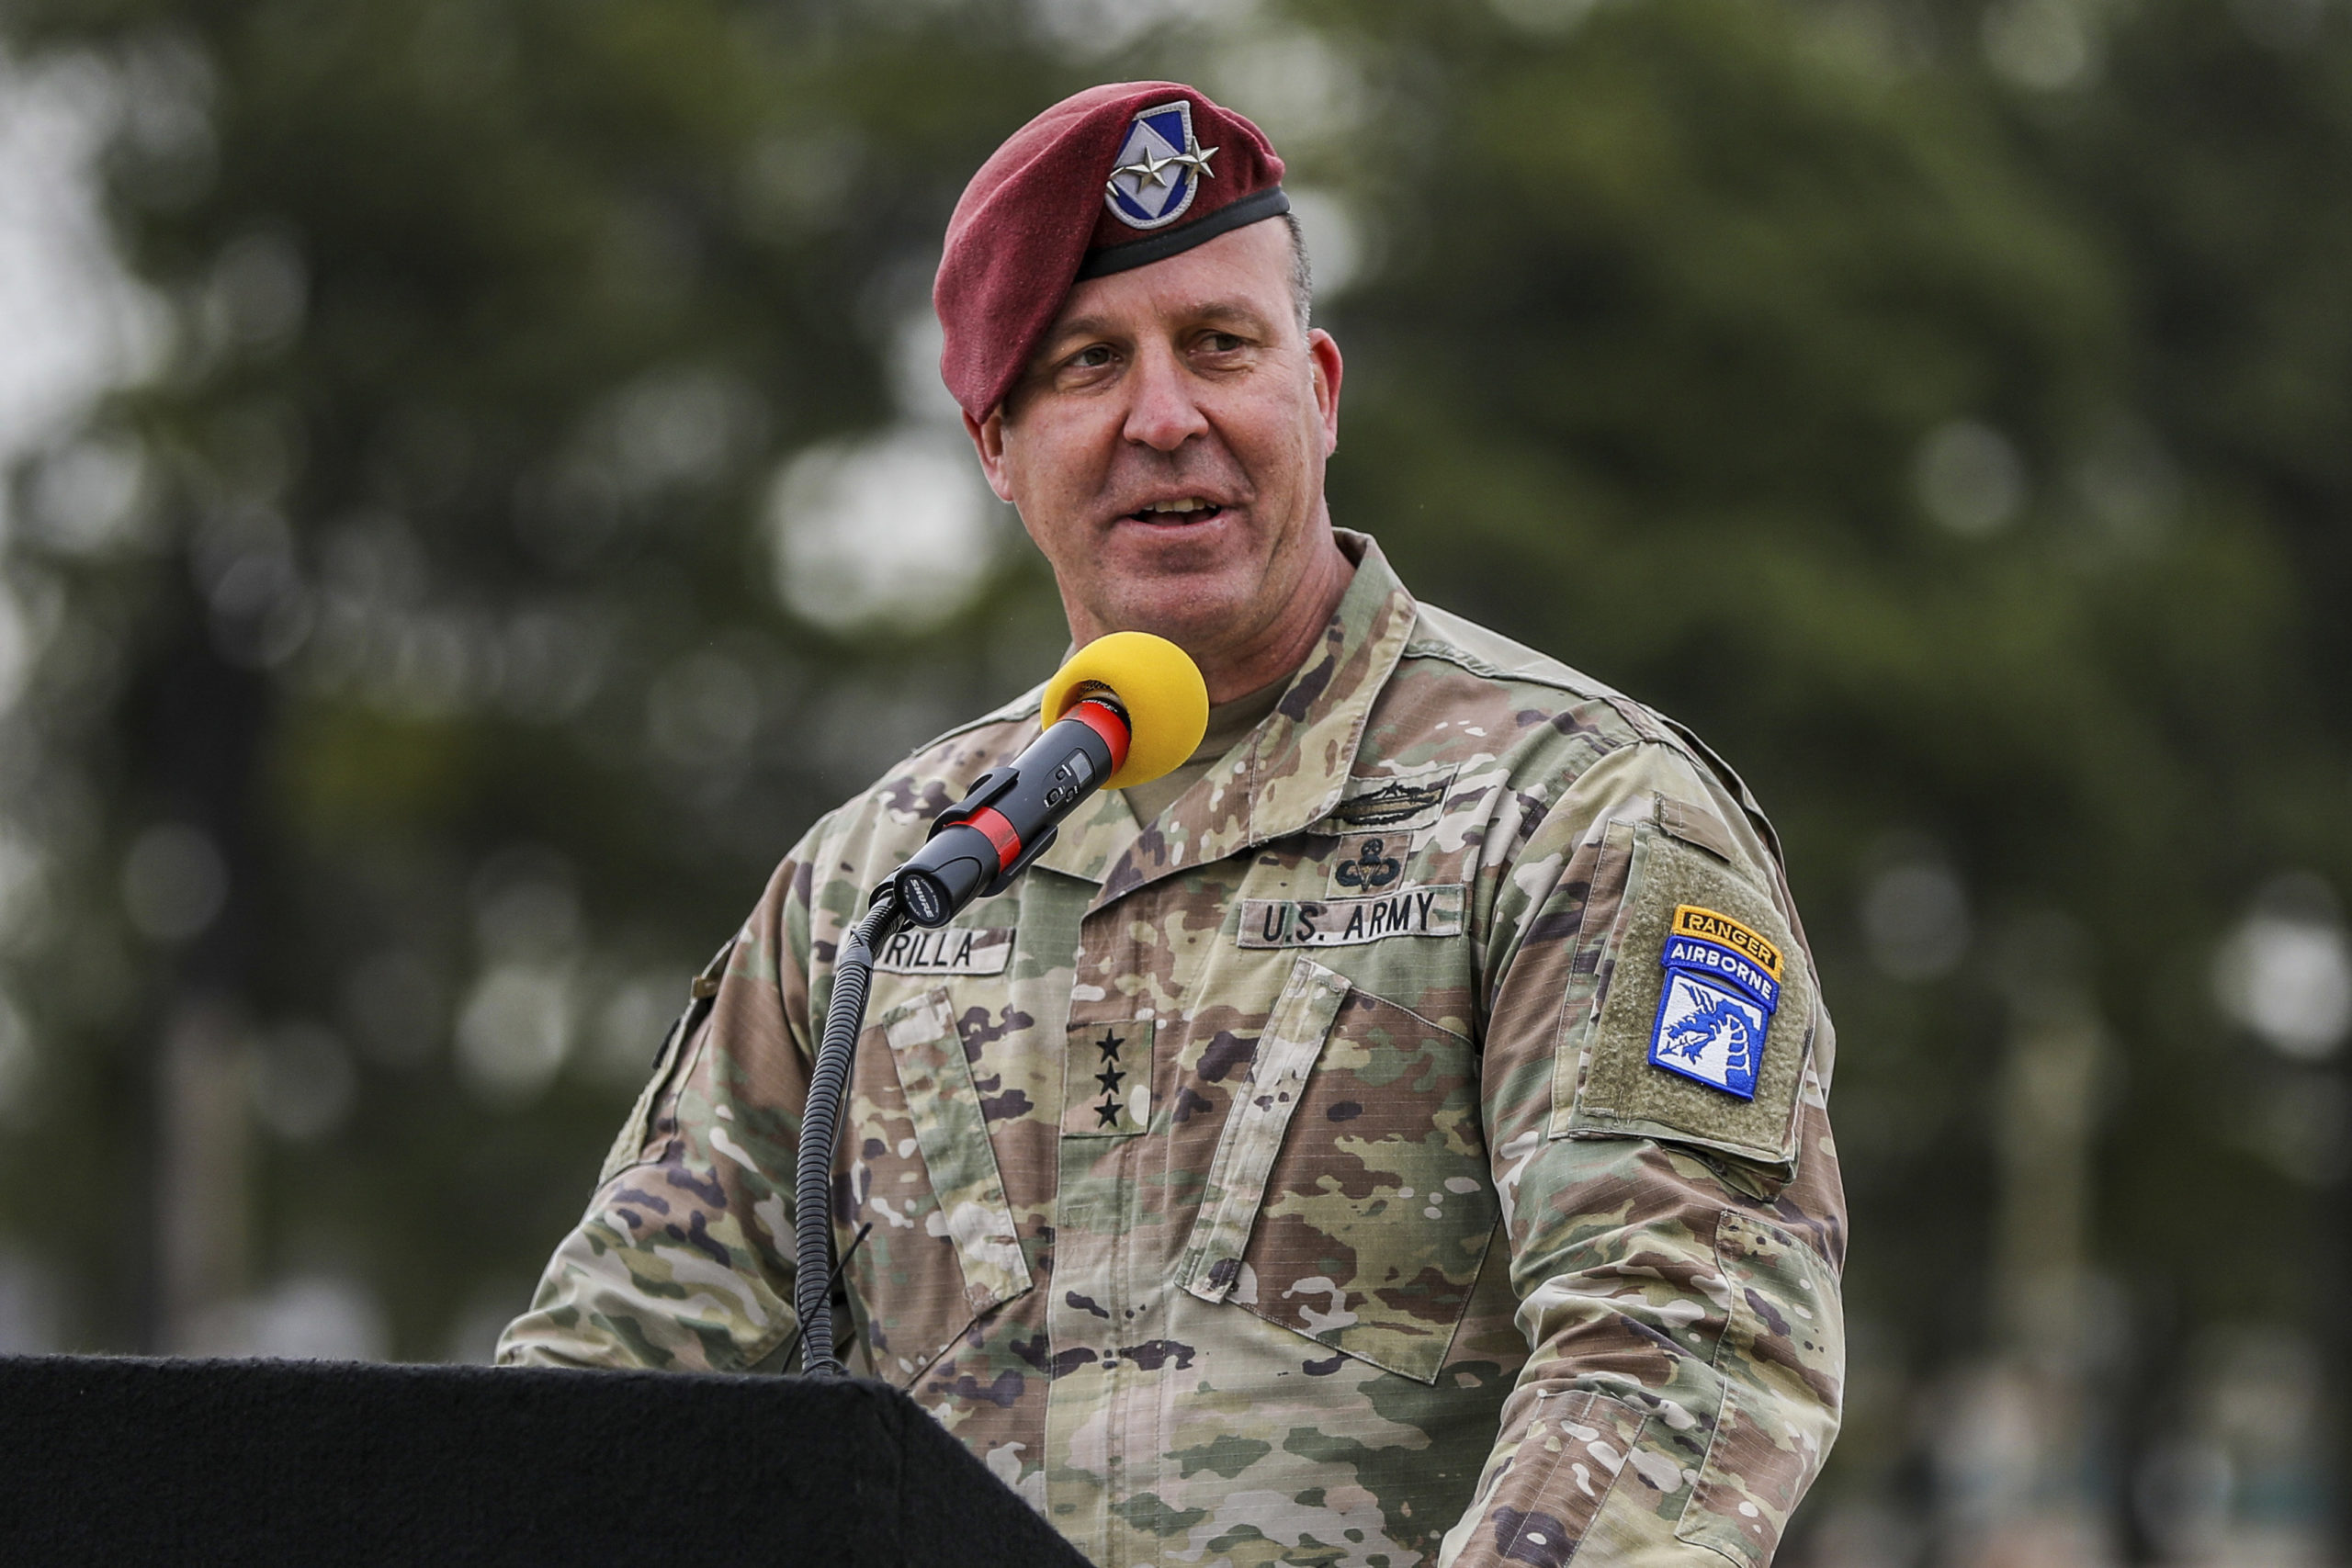 Then-Lt. Gen Michael "Erik" Kurilla speaks at the 101st Airborne Division change of command at Fort Campbell, Kentucky, on March 5, 2021.